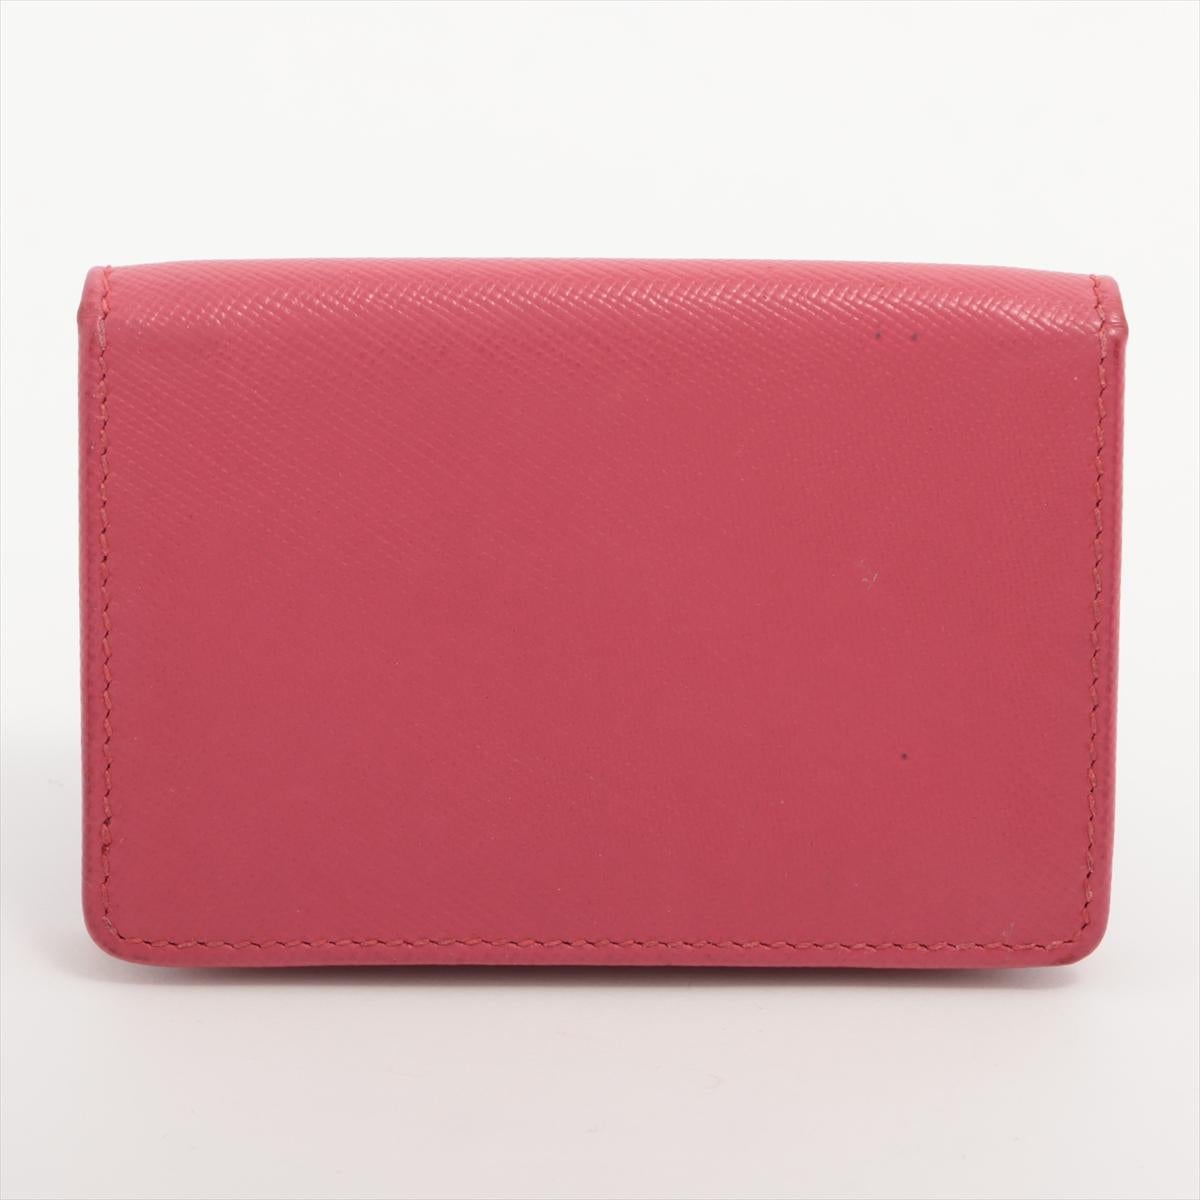 Prada Saffiano Leather Card Case Pink In Good Condition In Indianapolis, IN